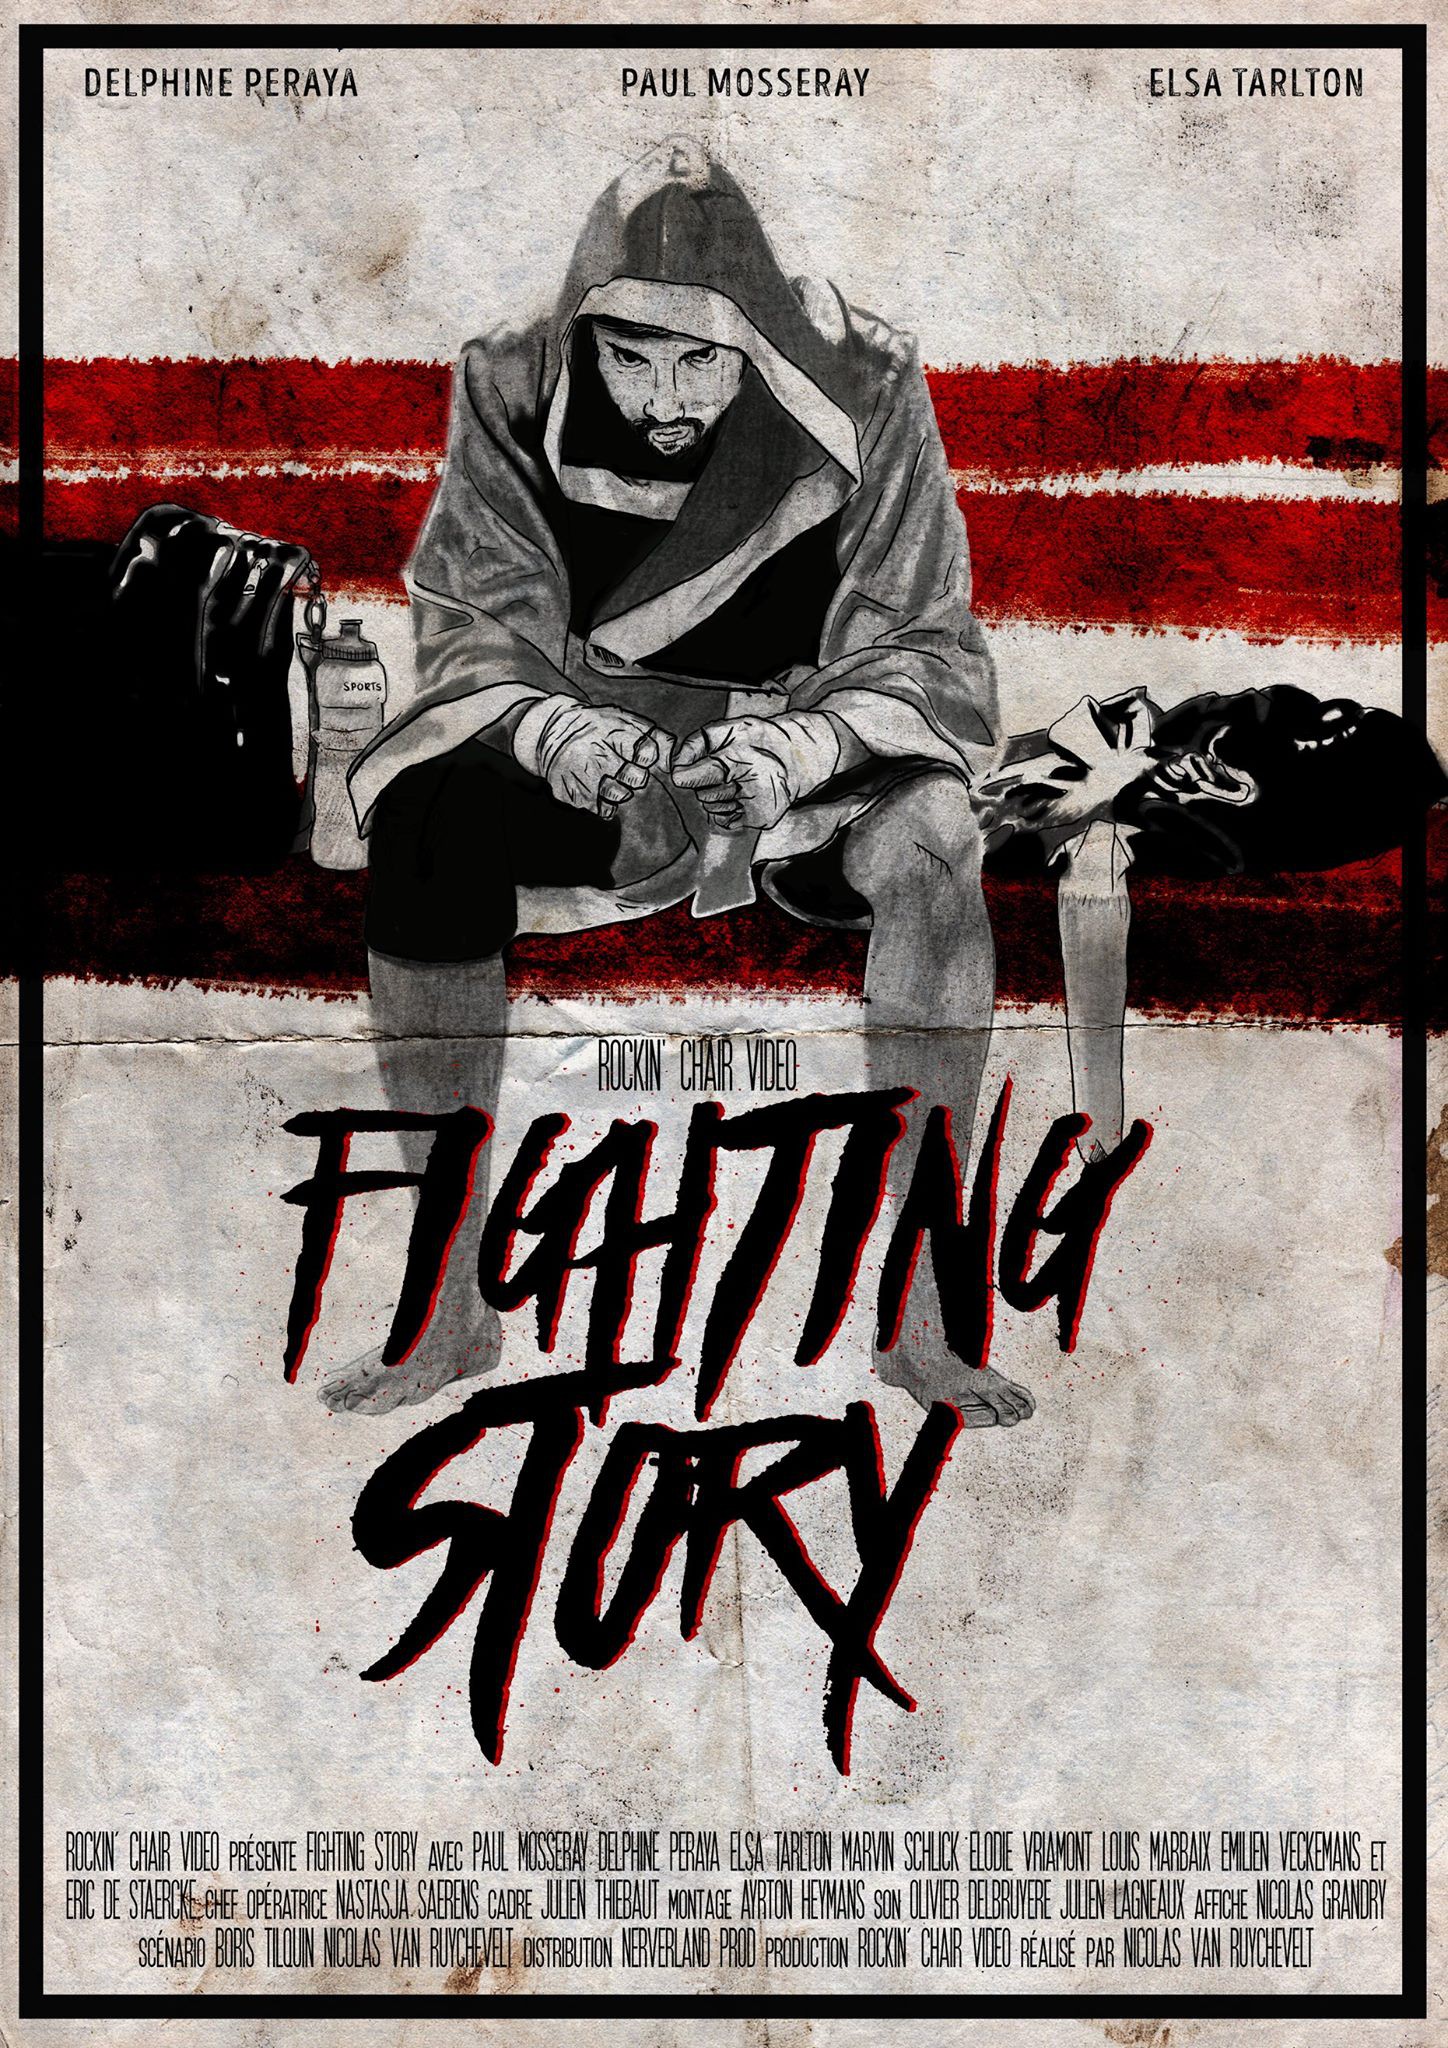 Mega Sized Movie Poster Image for Fighting Story